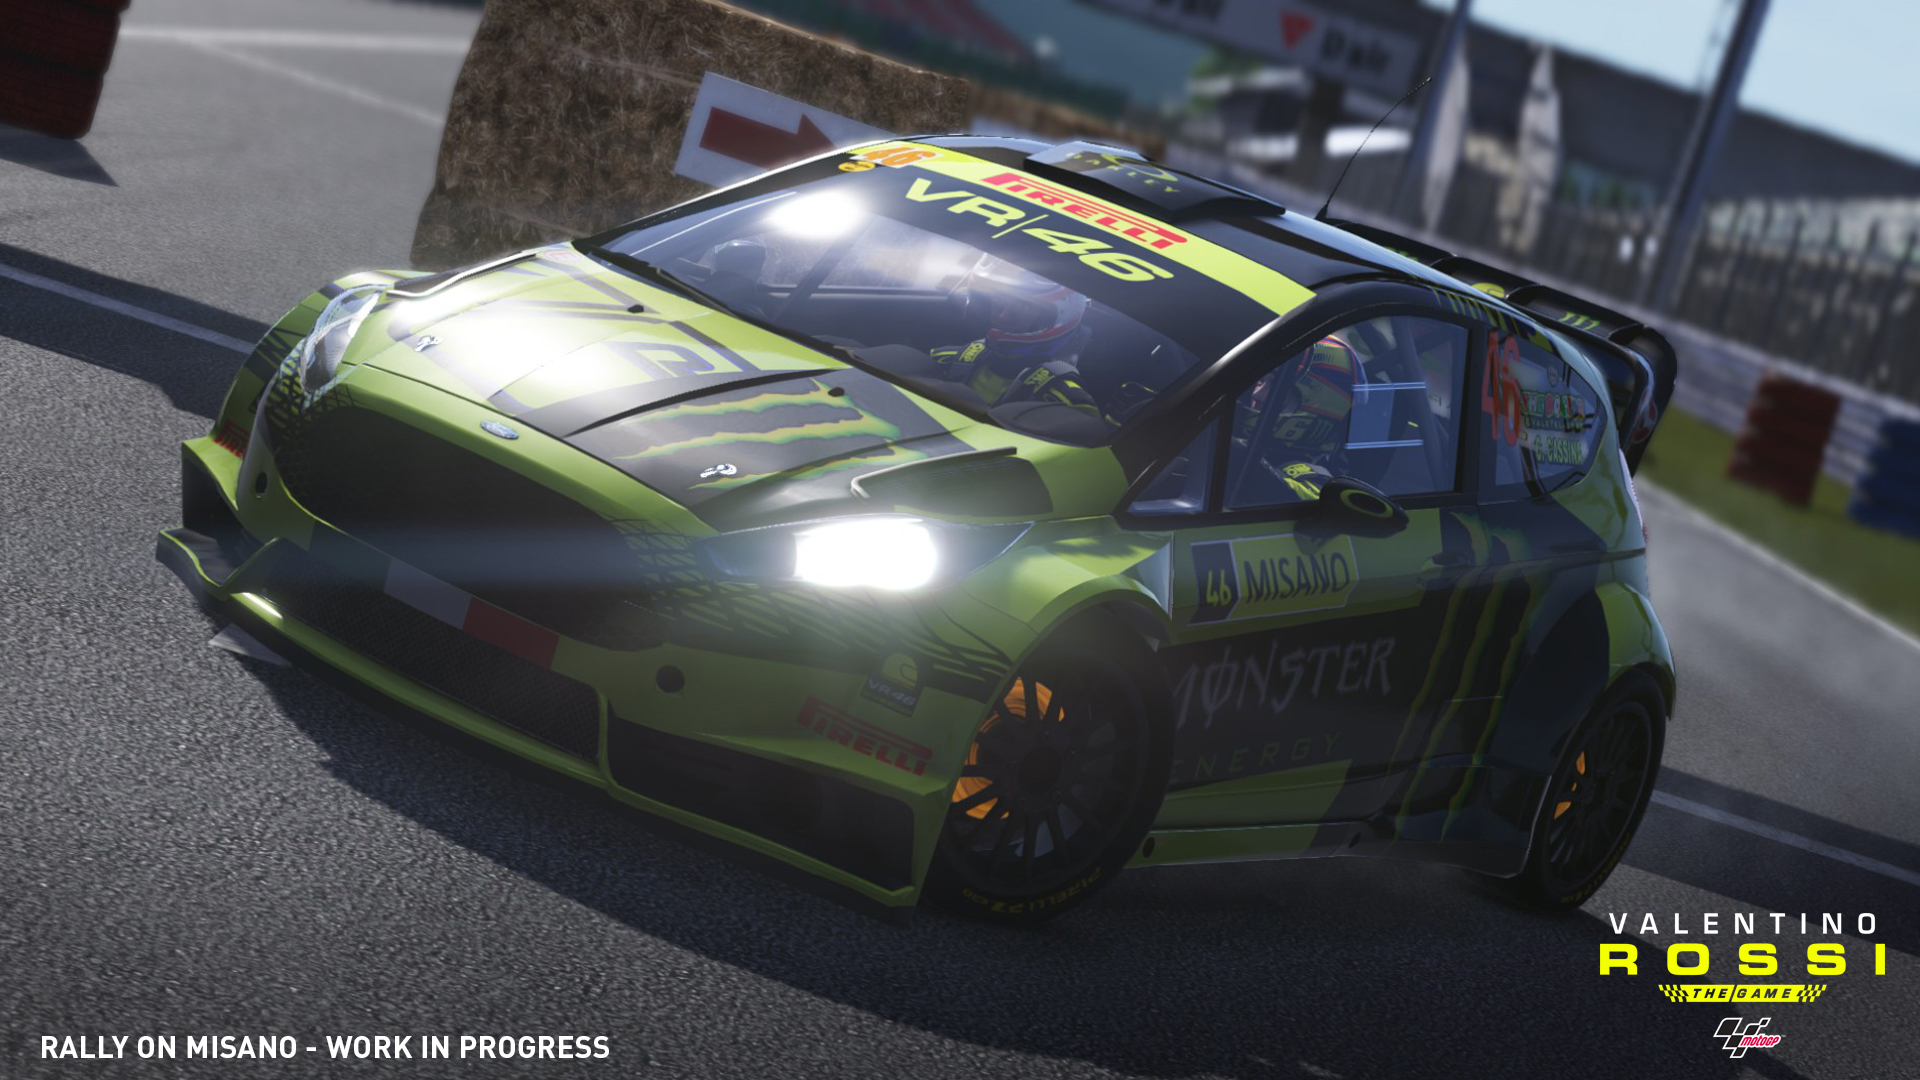 Valentino Rossi The Game Monza Rally Ford Fiesta